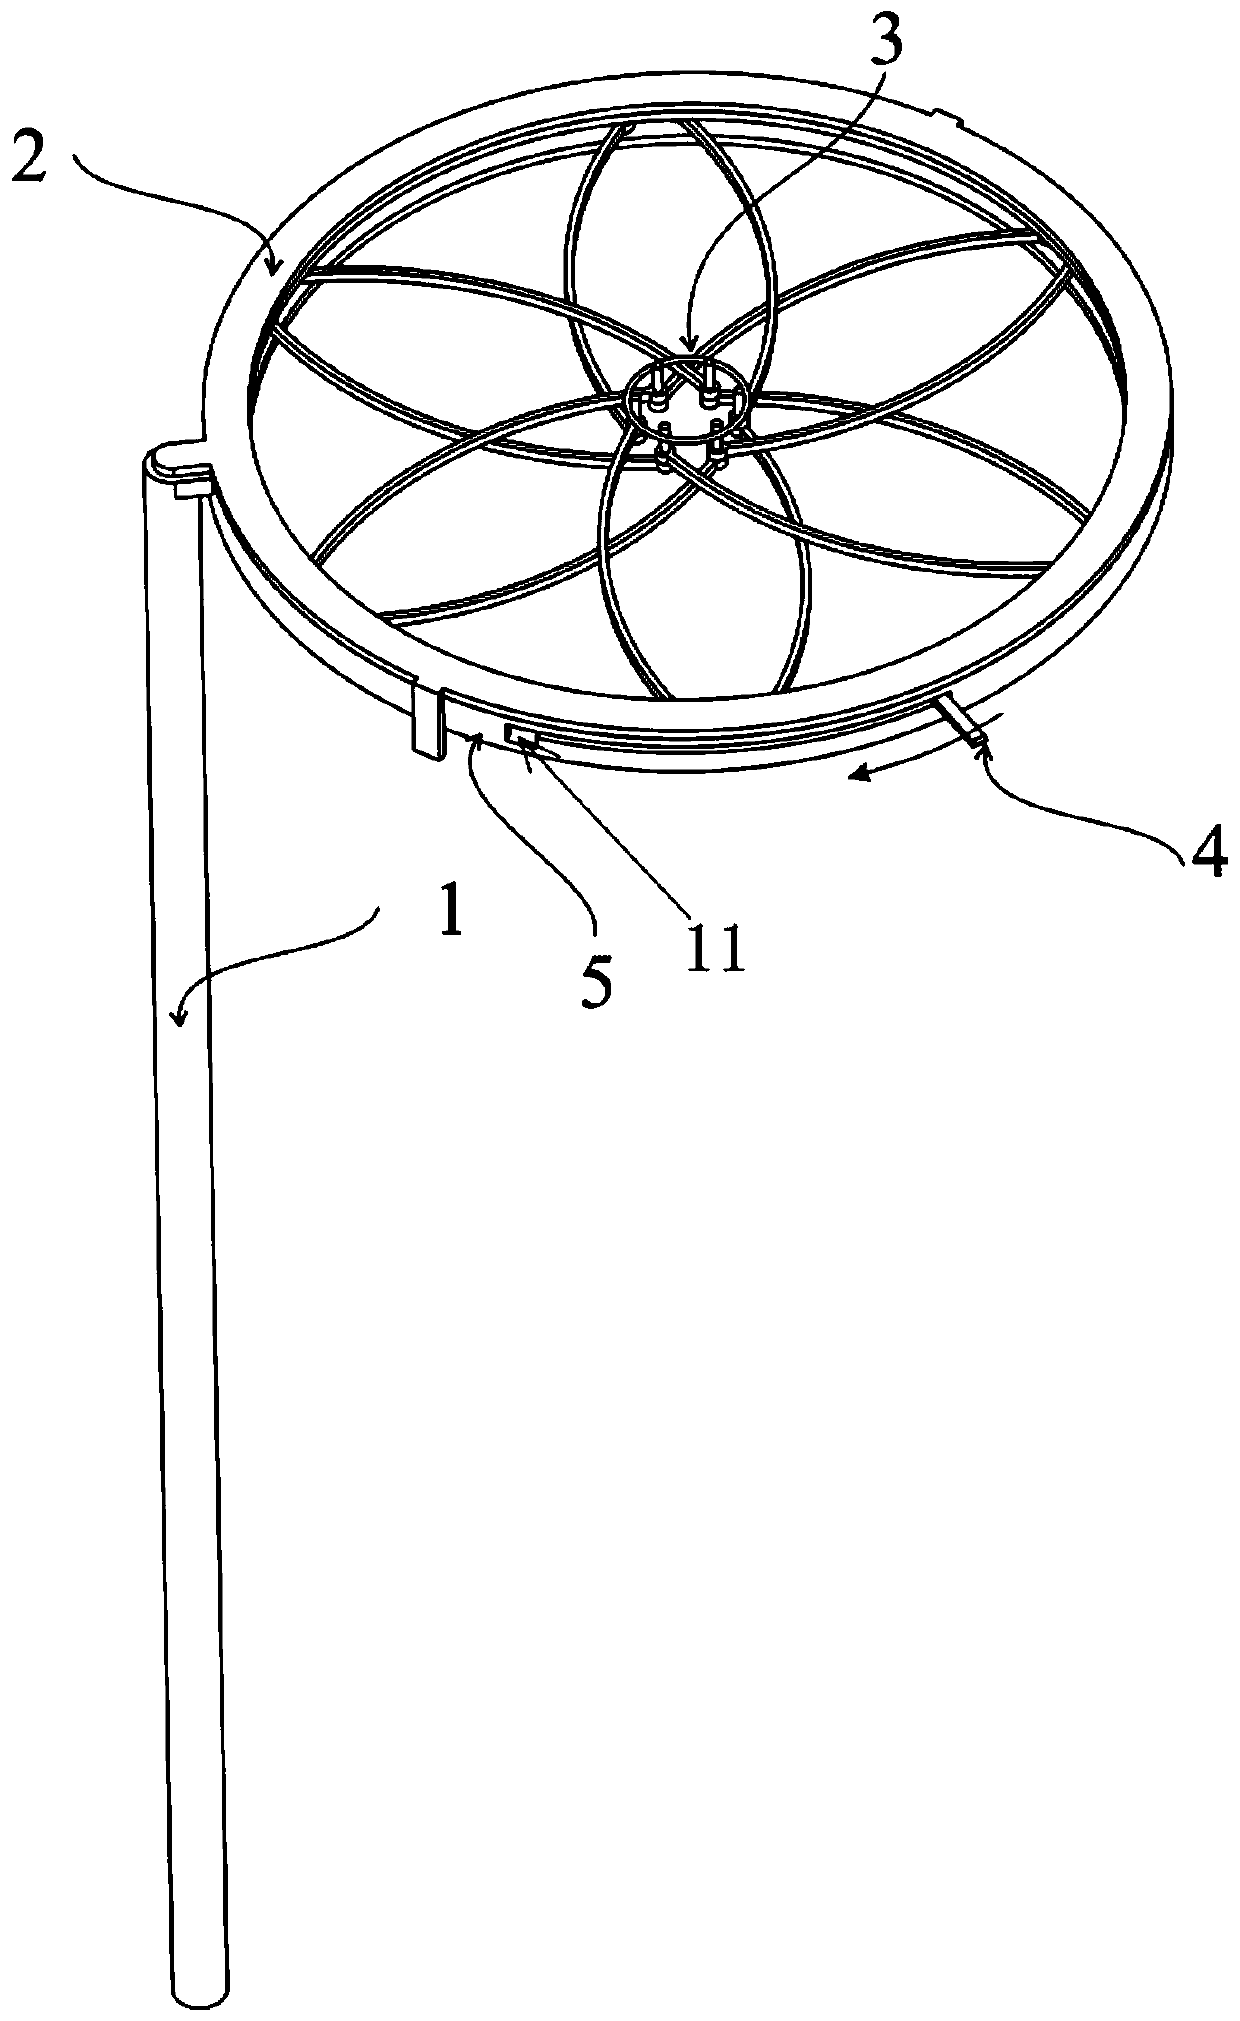 A Banana Bagging Device Based on Simply Supported Rigid Iris Mechanism